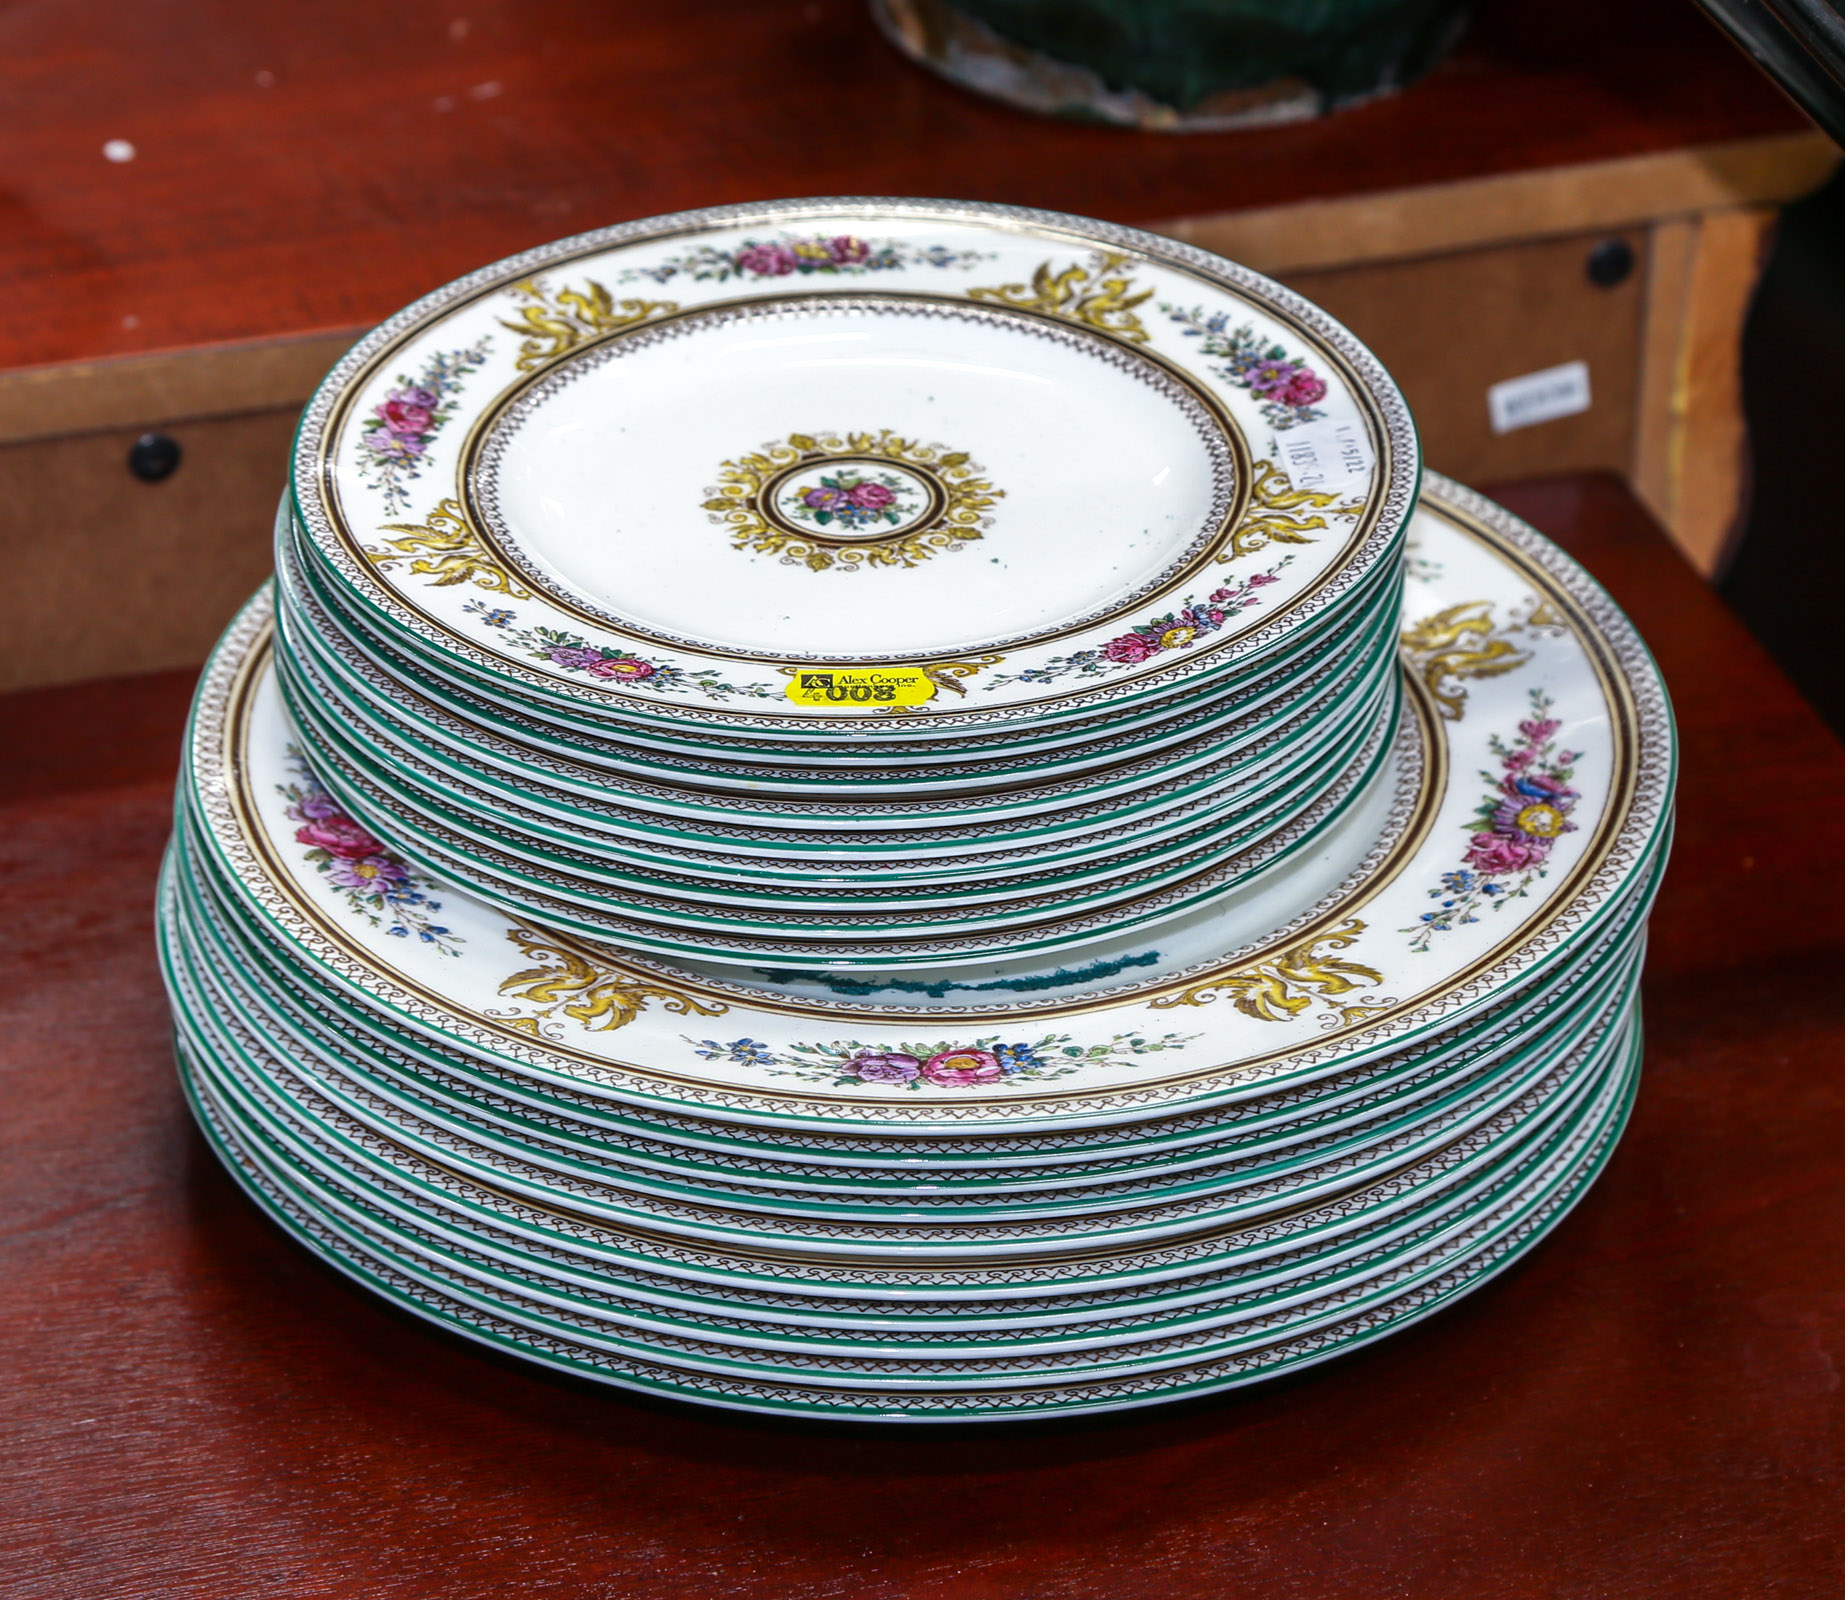 19 WEDGWOOD PLATES IN THE COLUMBIA